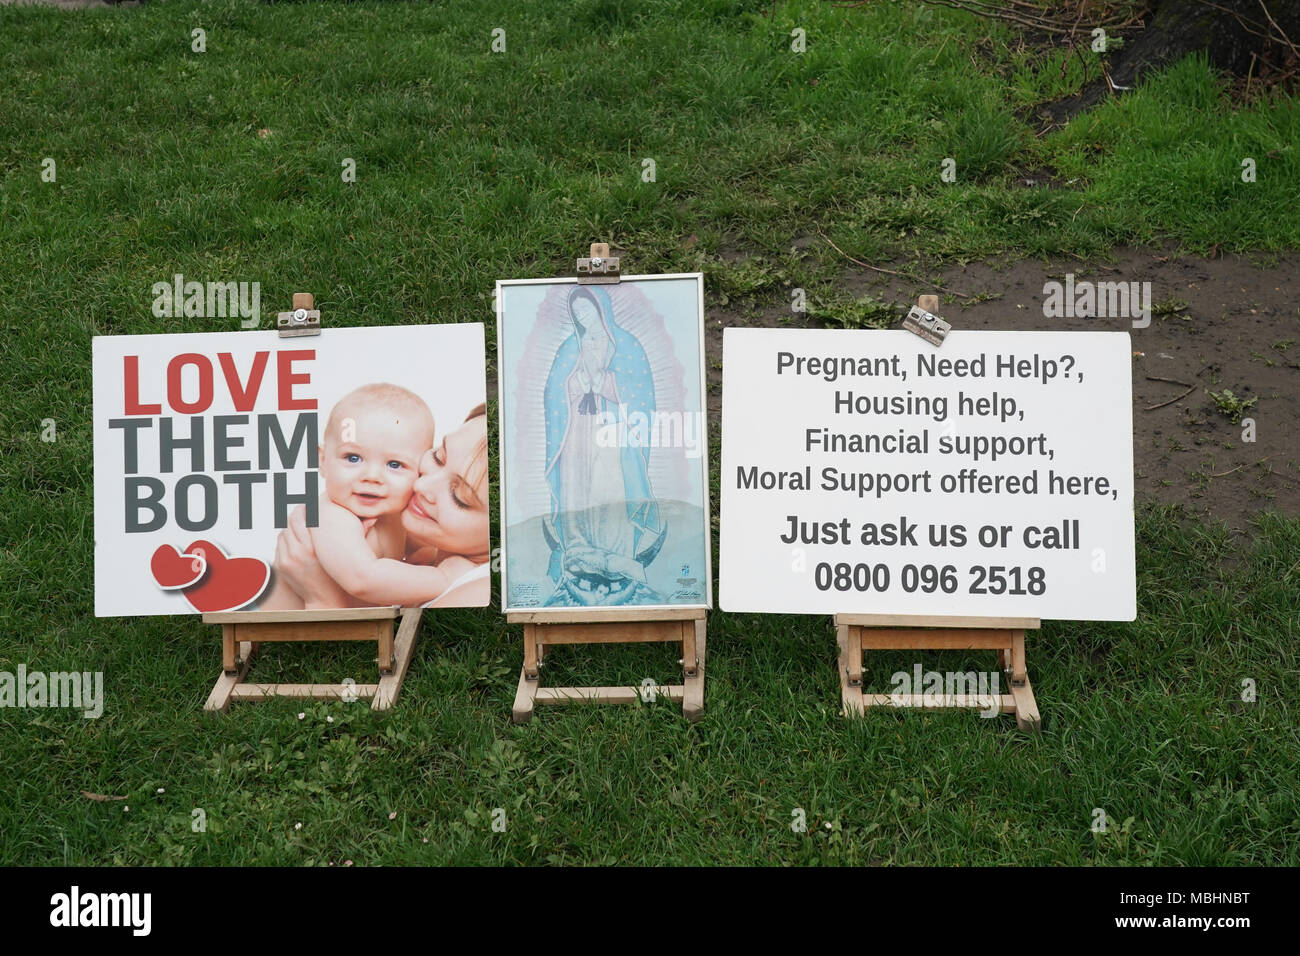 London, UIK. 11th April 2018. Protest signs outside the Marie Stopes abortion clinic in Mattock Lane, Ealing, London, after Ealing Council's decision to impose a ban on protests outside the clinic. Photo date: Wednesday, April 11, 2018. Credit: Roger Garfield/Alamy Live News Stock Photo